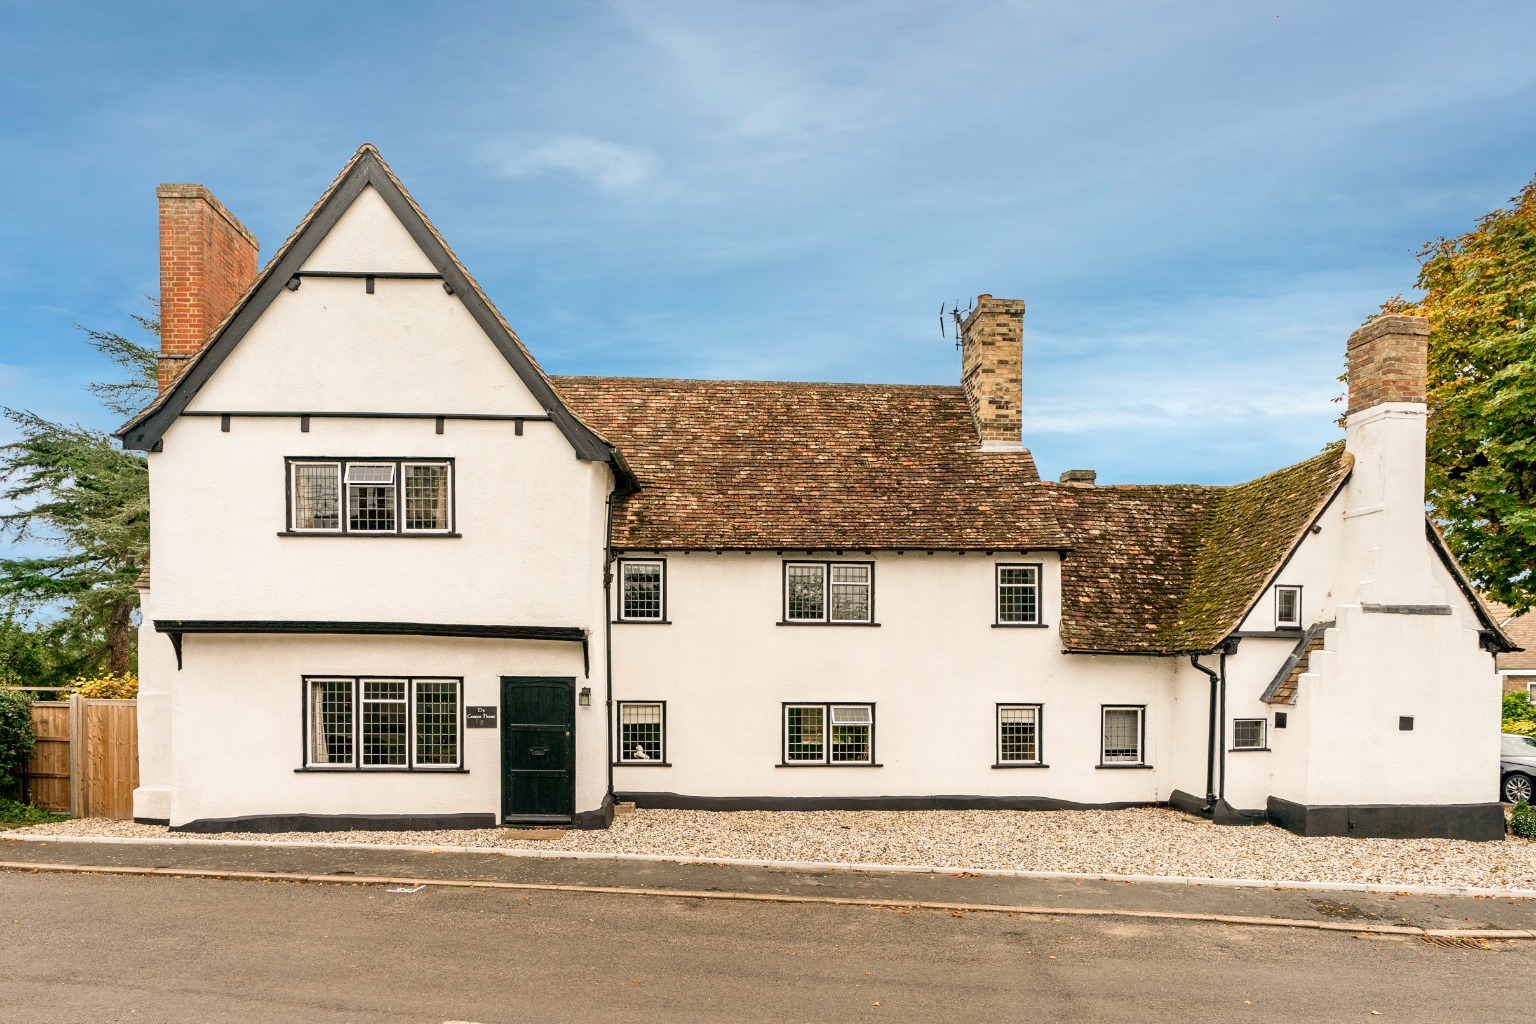 Situated opposite the 12th century Church,  in the peaceful Huntingdonshire village of Southoe, this stunning 17th century house was originally the Rectory. Since then The Corner House has taken on many guises, including an Inn purported to have played host to the infamous highwayman, Dick Turpin.